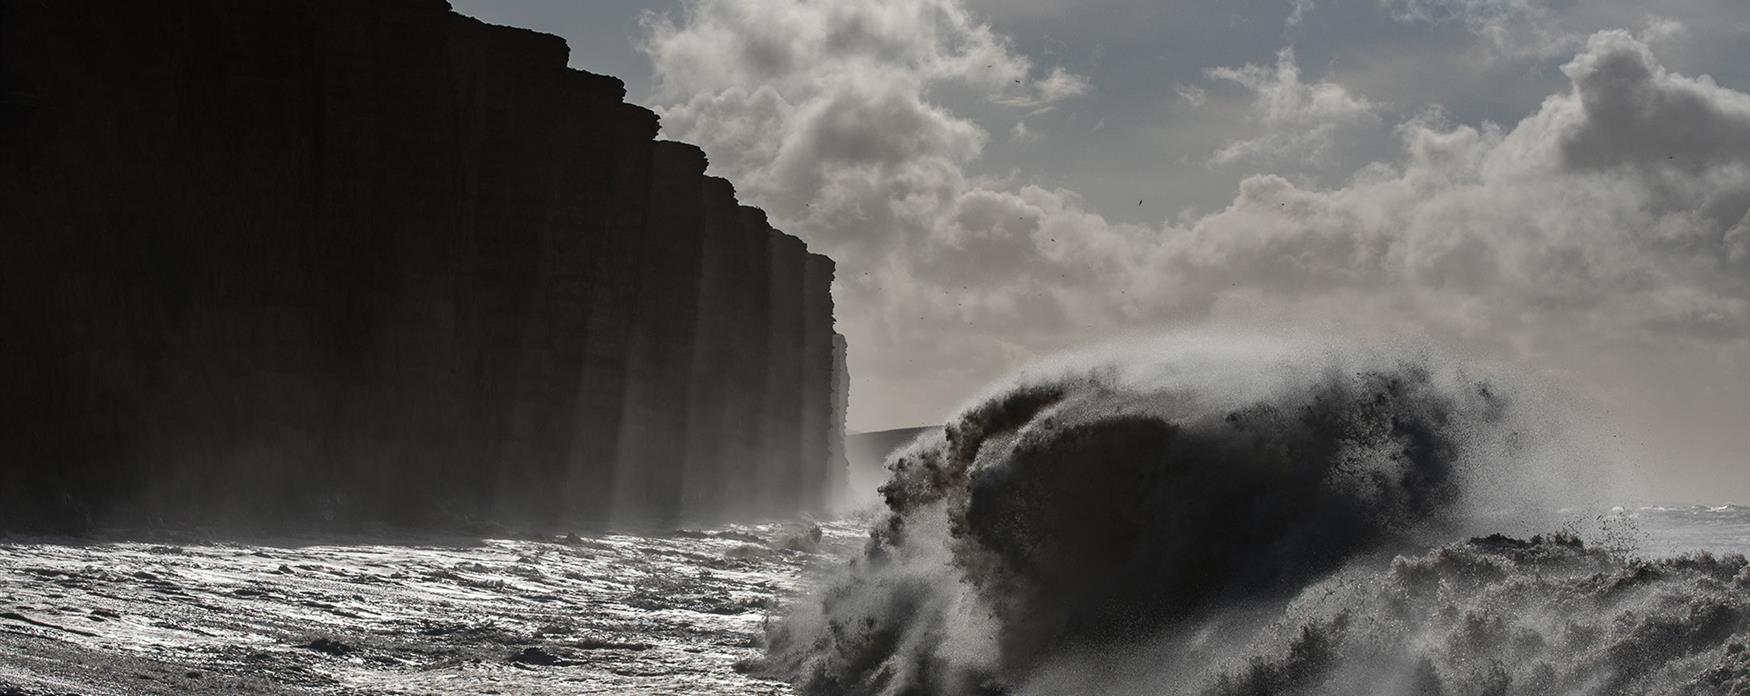 A large storm wave breaks in the sea in front of the cliffs of West Bay. The image is grey and stormy.